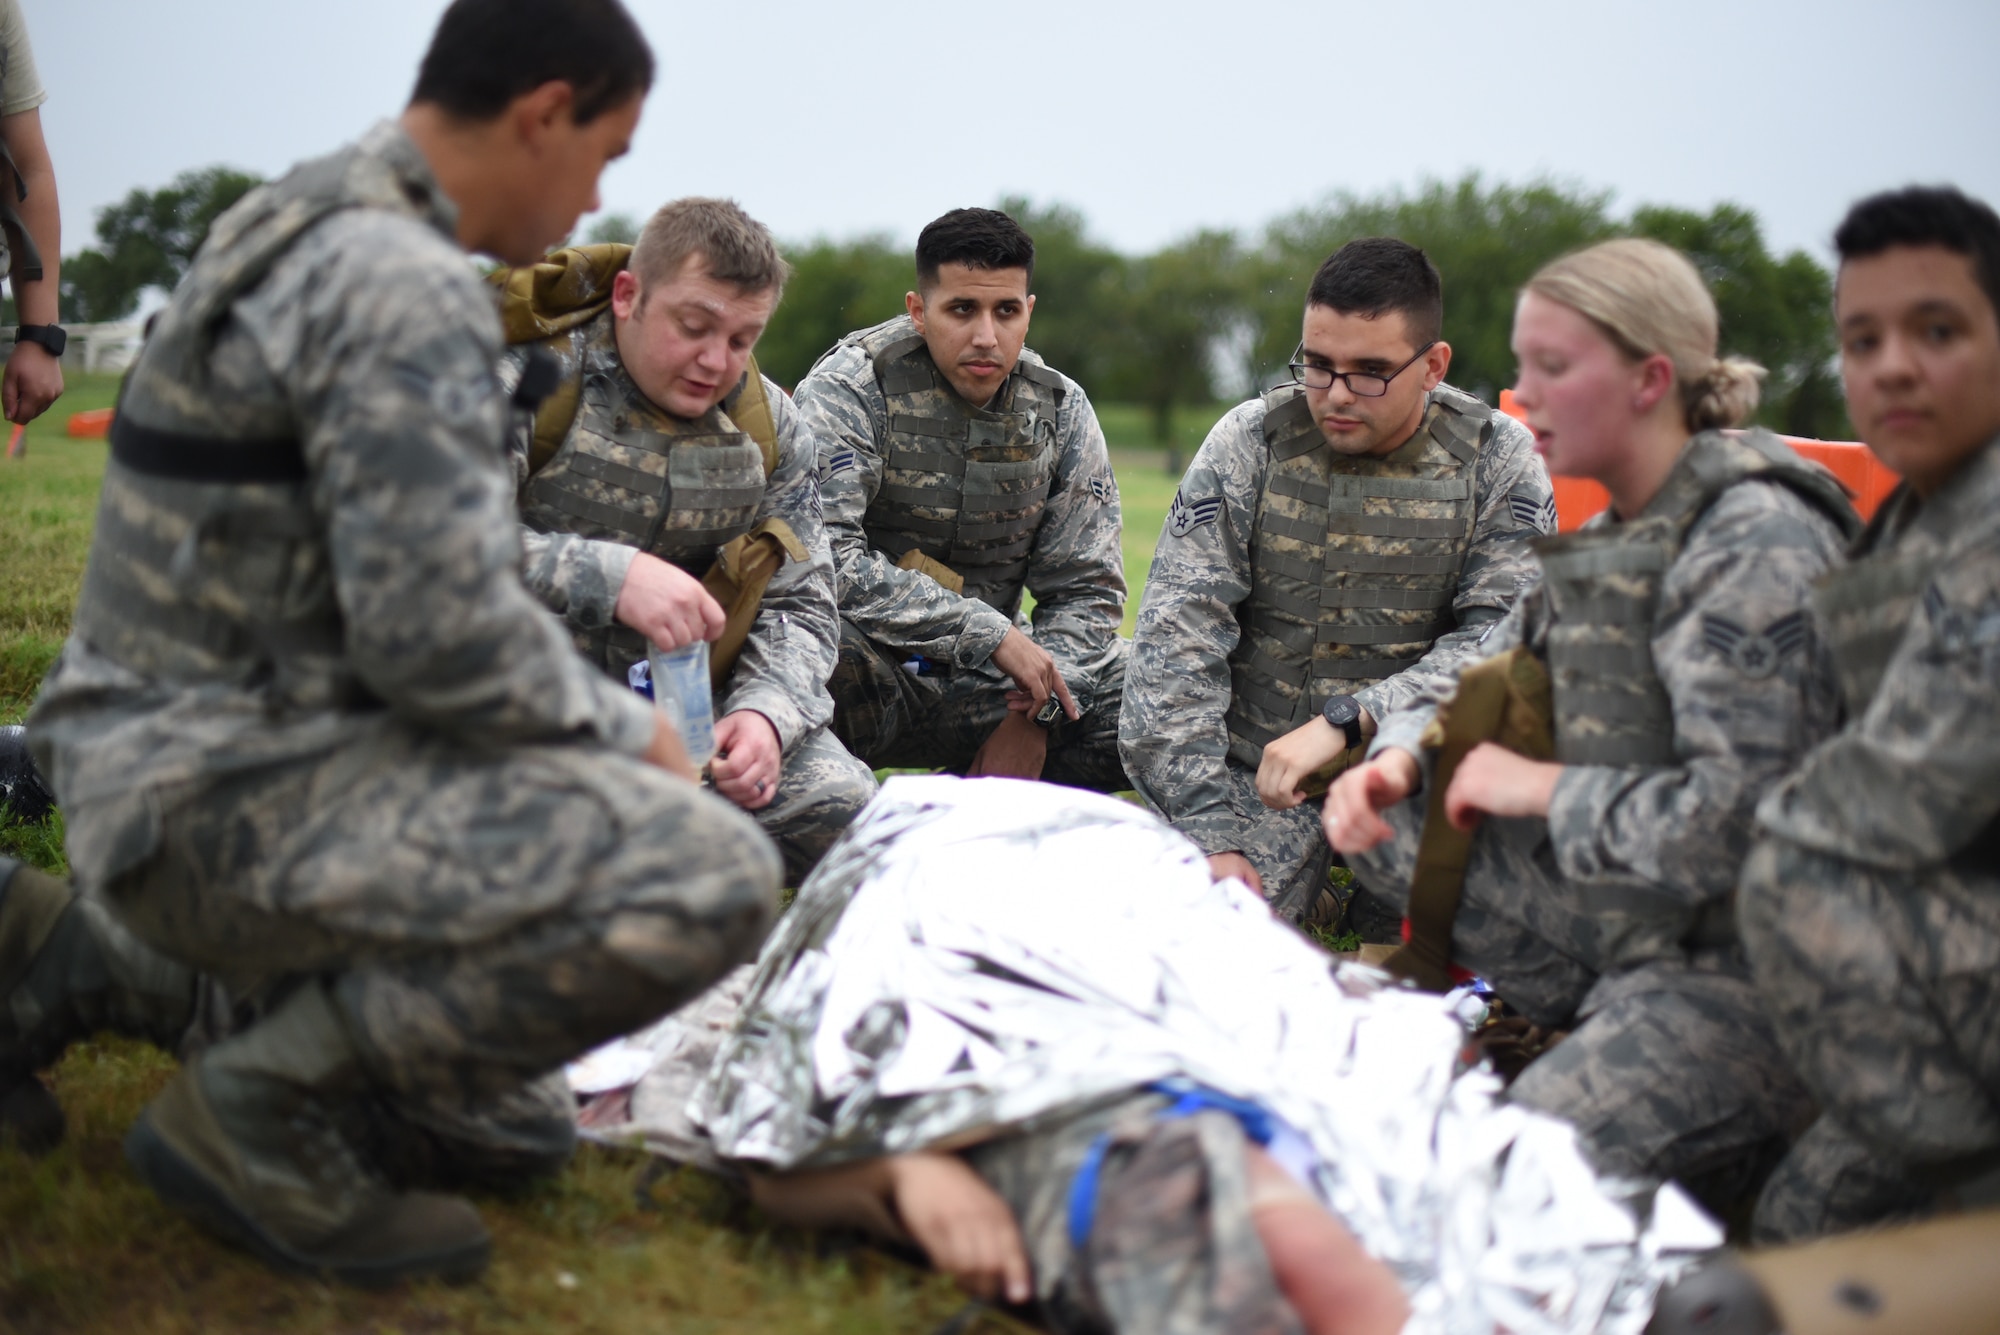 Members of the 22nd Medical Group discuss the strategy needed to perform Tactical Combat Casualty Care on an Airman with simulated wounds during an Emergency Medical Technician Rodeo Aug. 22, 2019, at McConnell Air Force Base, Kan. The TCCC course replacing the Self Aid and Buddy Care Program are tentatively scheduled to begin at the end of 2019 for Airmen across McConnell. (U.S. Air Force photo by Airman 1st Class Alexi Myrick)